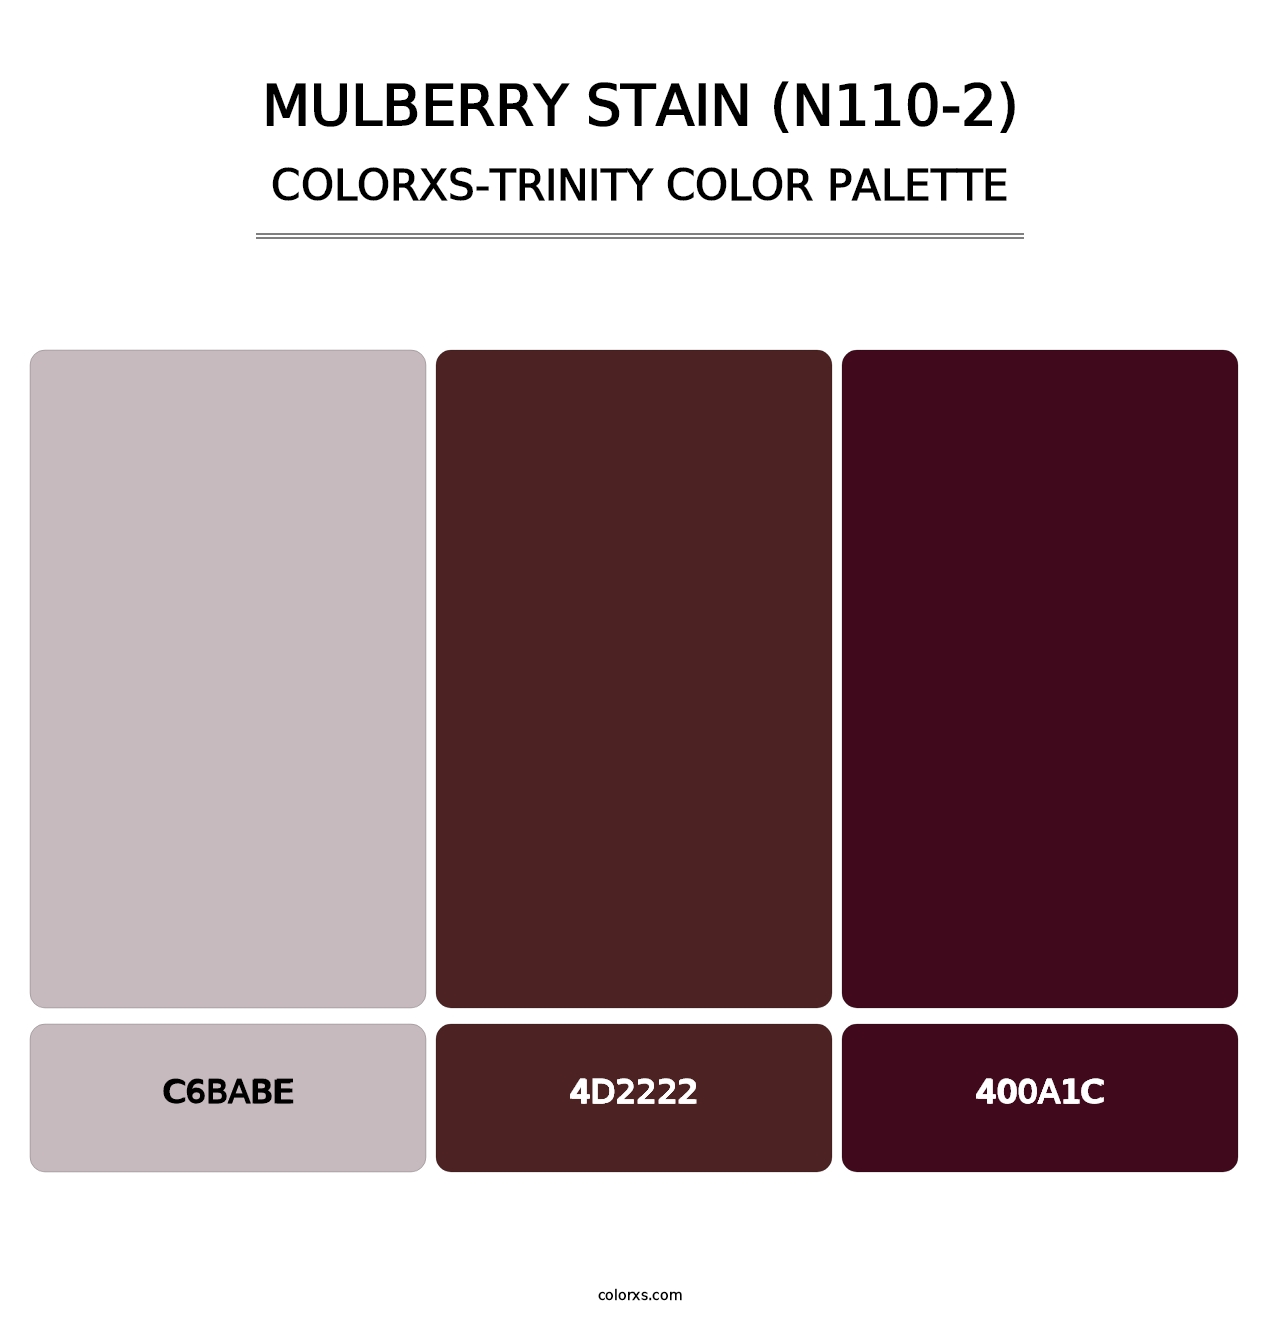 Mulberry Stain (N110-2) - Colorxs Trinity Palette